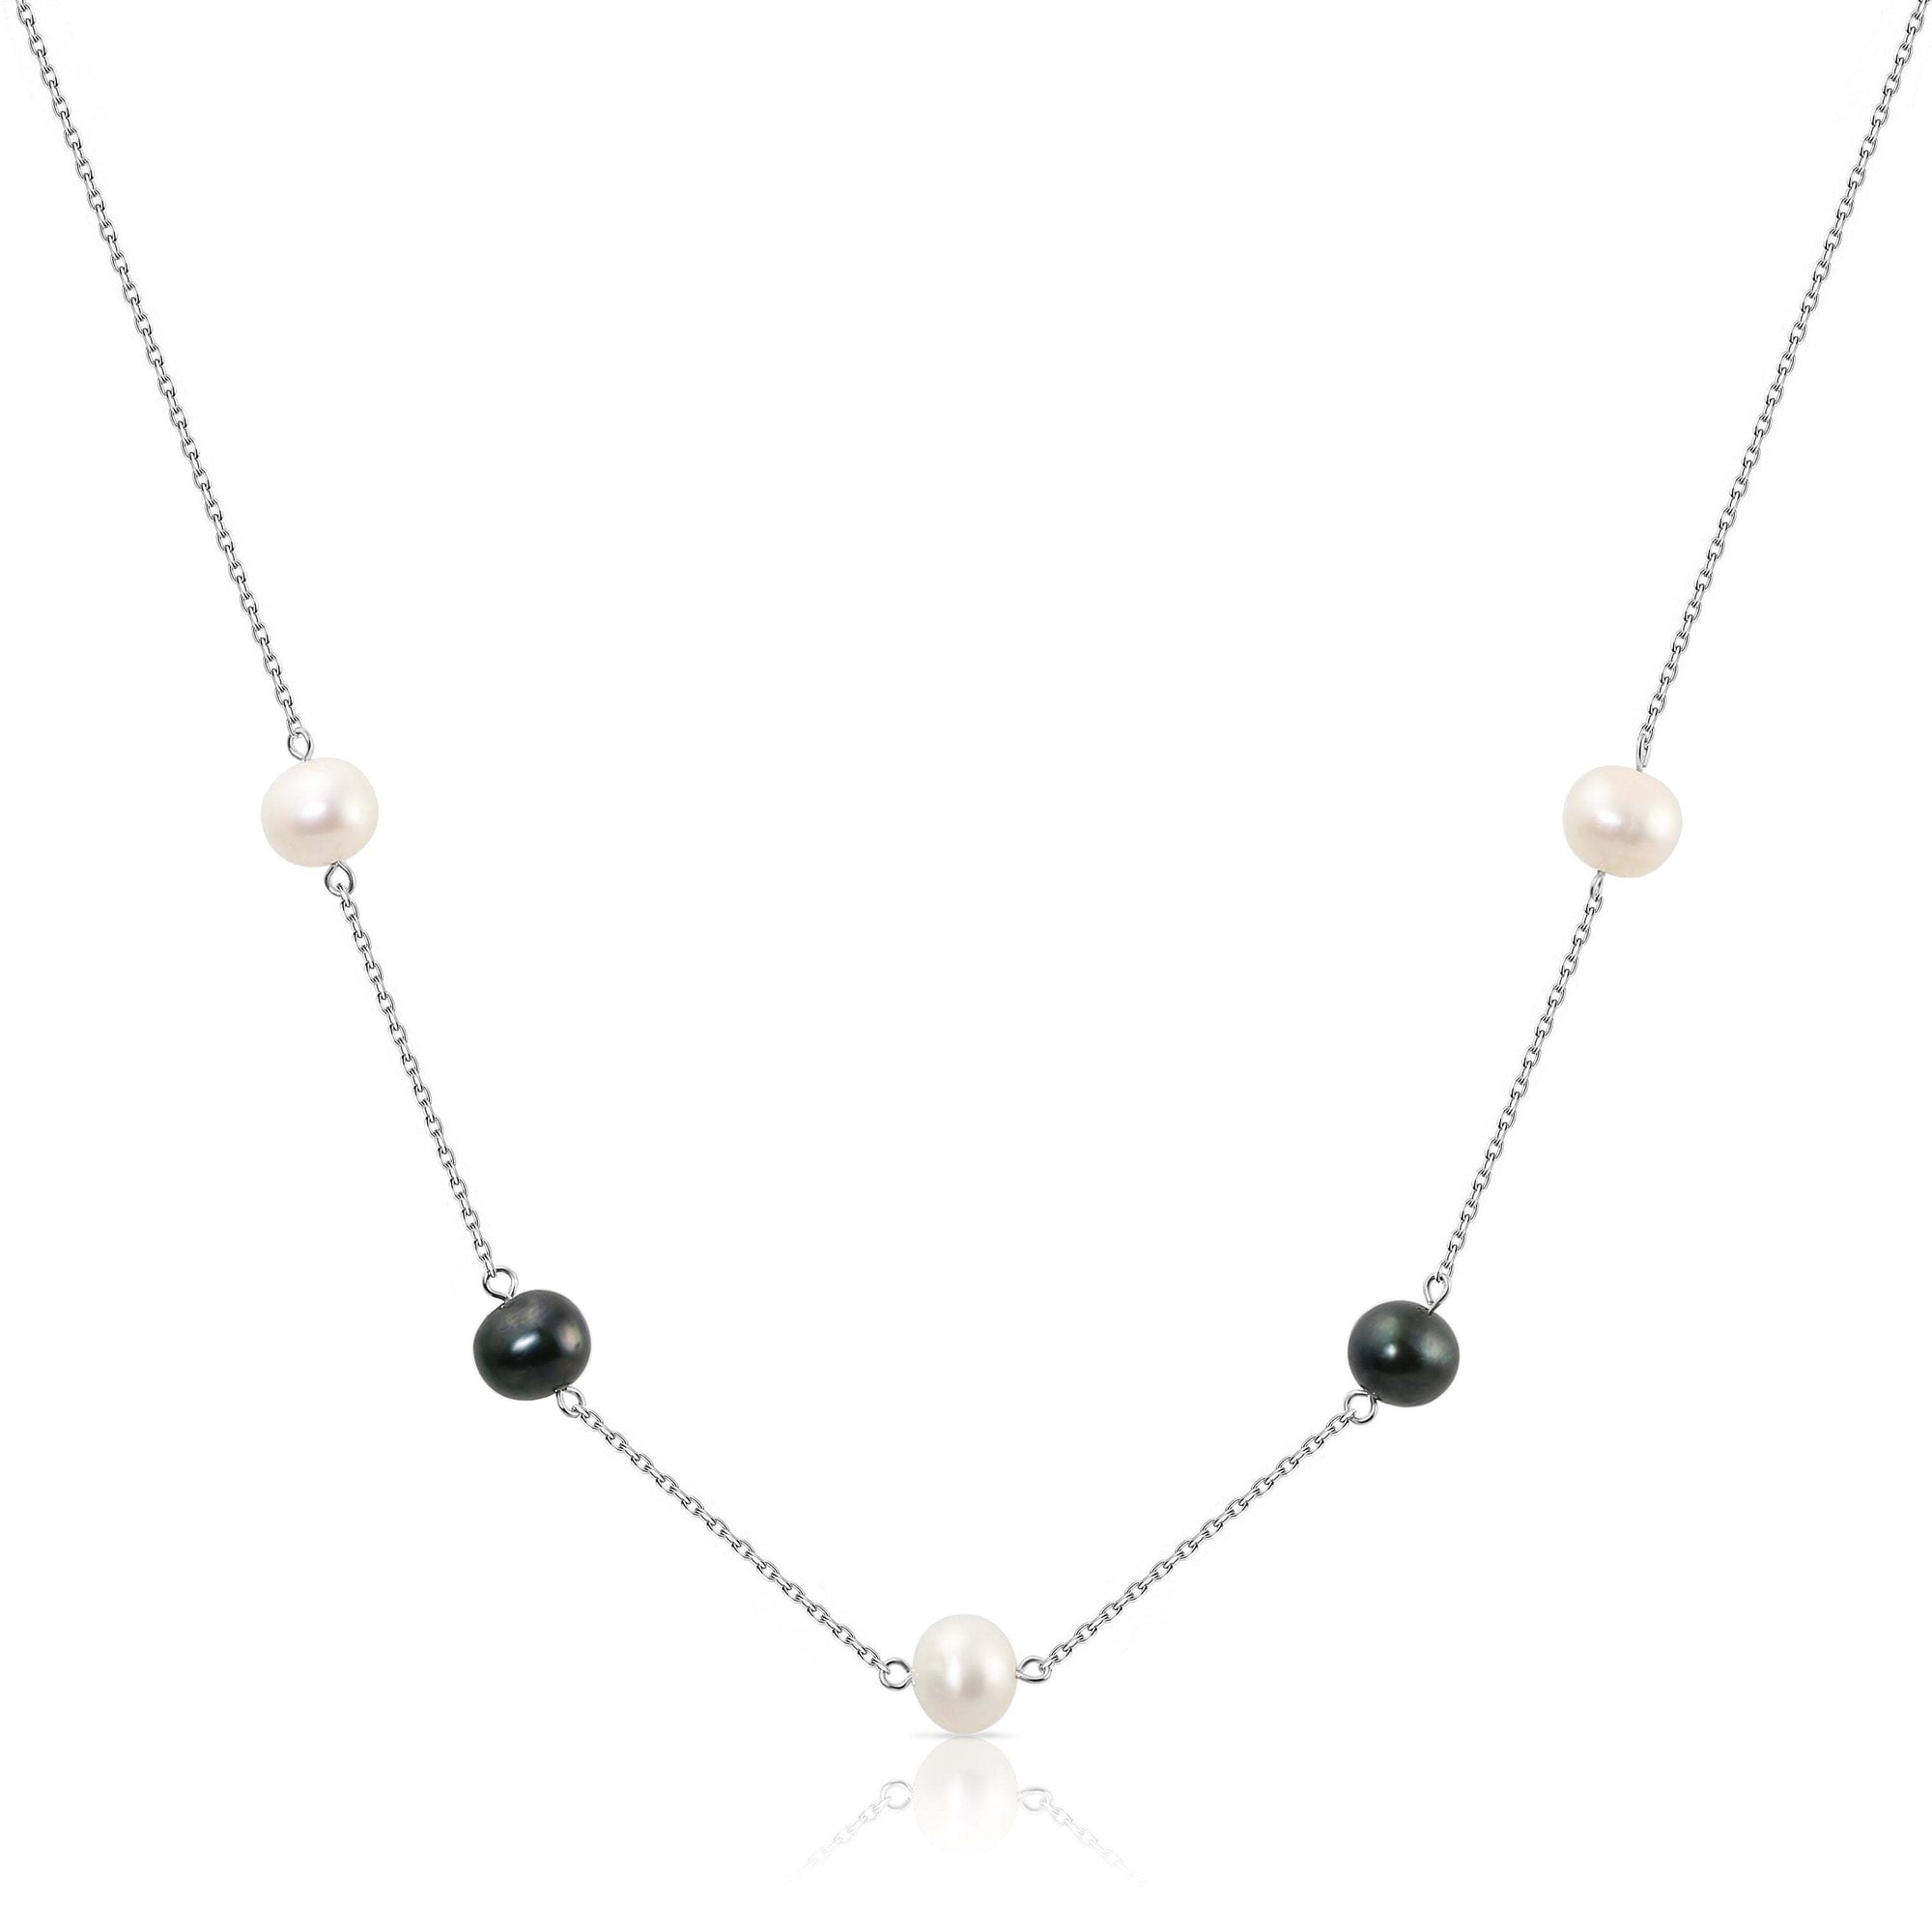 Pearl Station Necklace, Black and White Freshwater Cultured Pearls in Sterling Silver